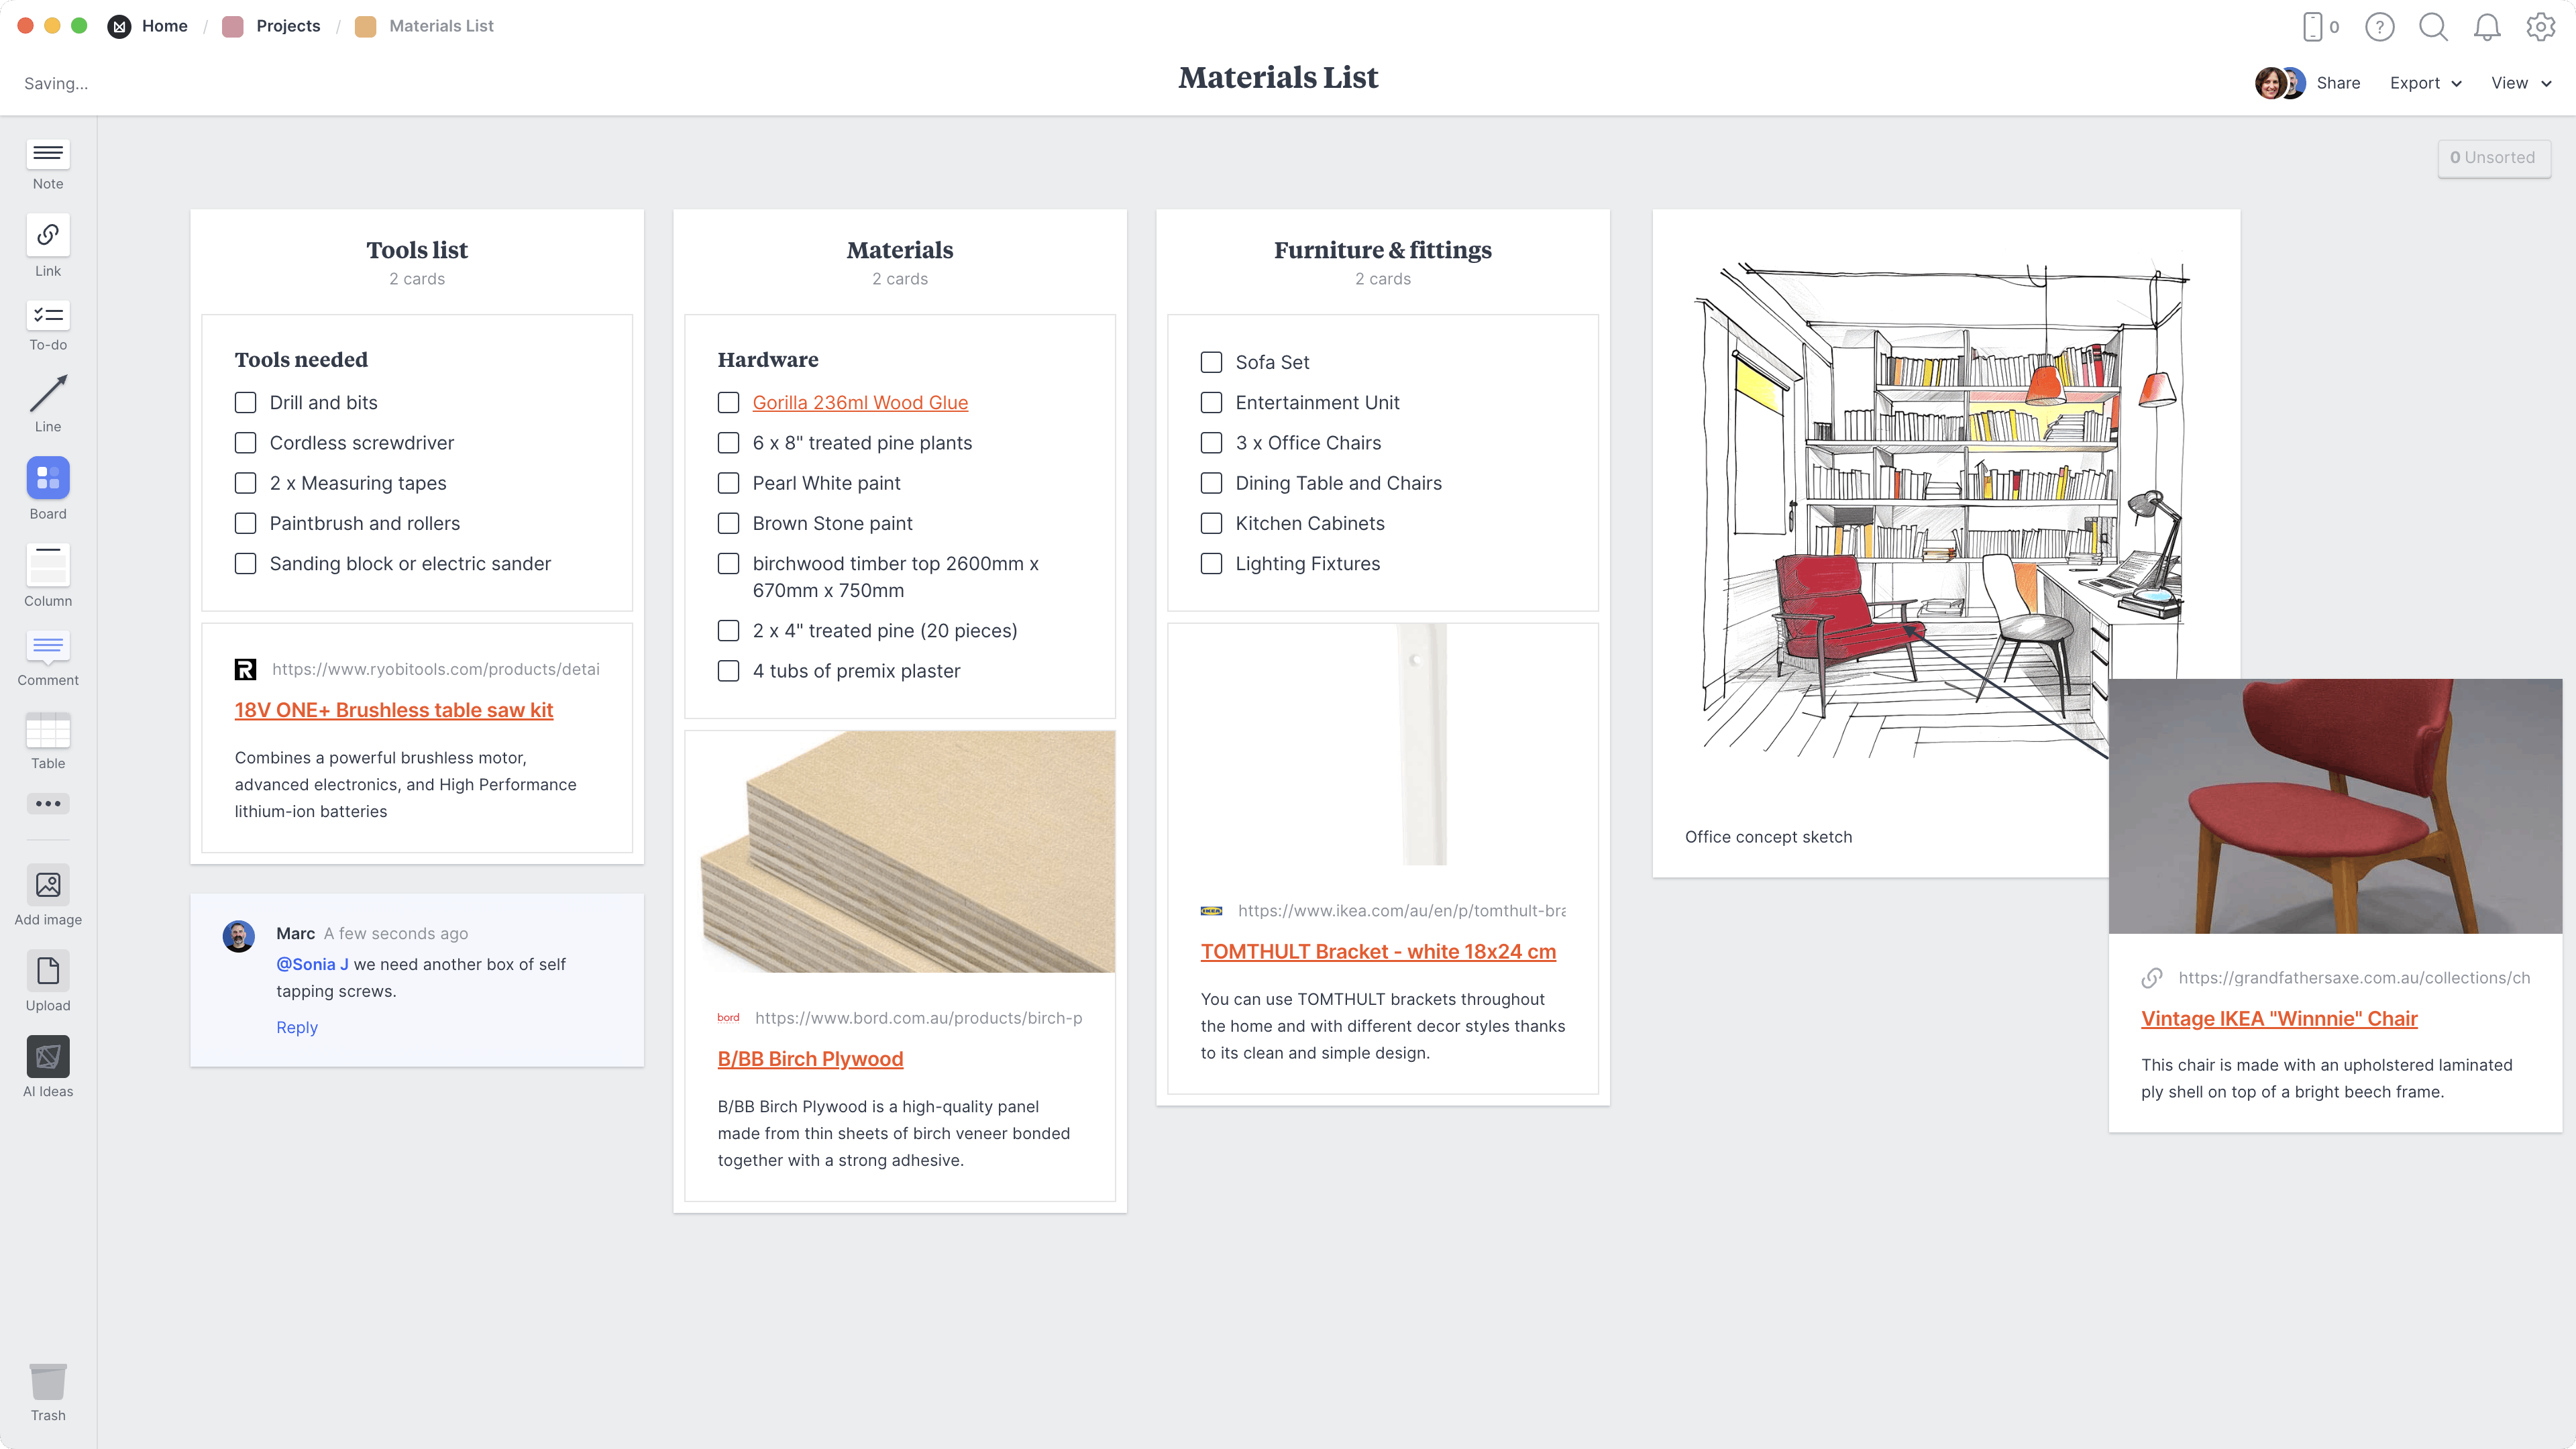 Renovation Materials List Template, within the Milanote app